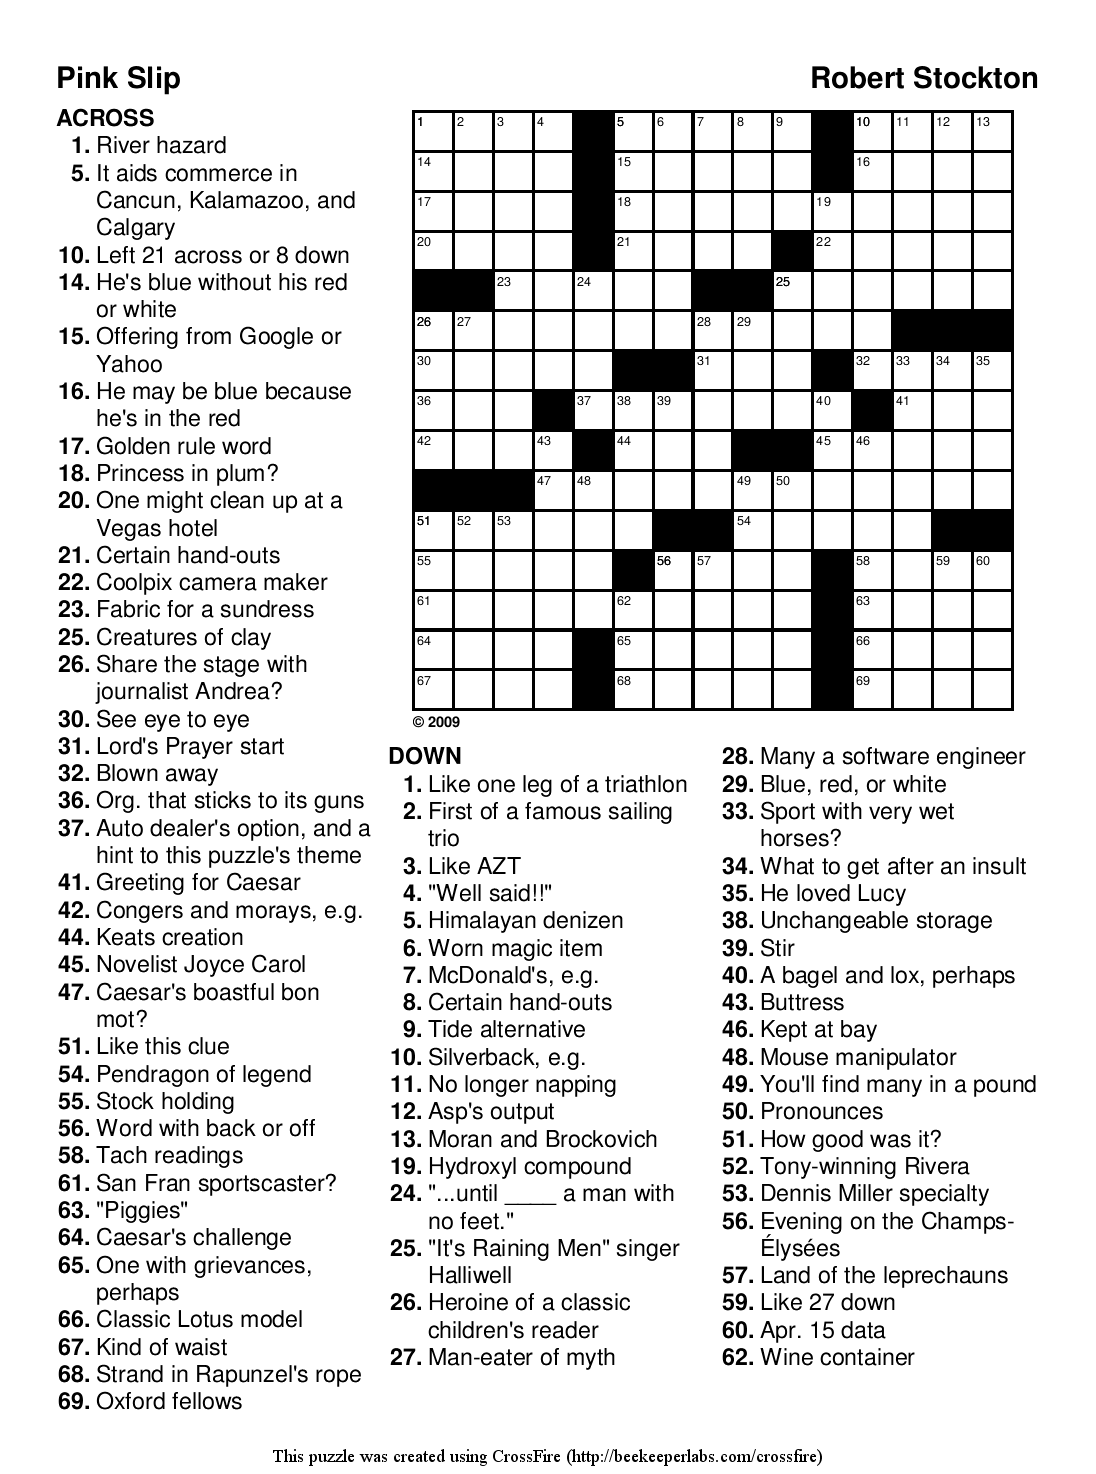 online arrow word puzzles free the 25 best crossword puzzles online ideas on pinterest online word arrow puzzles free 